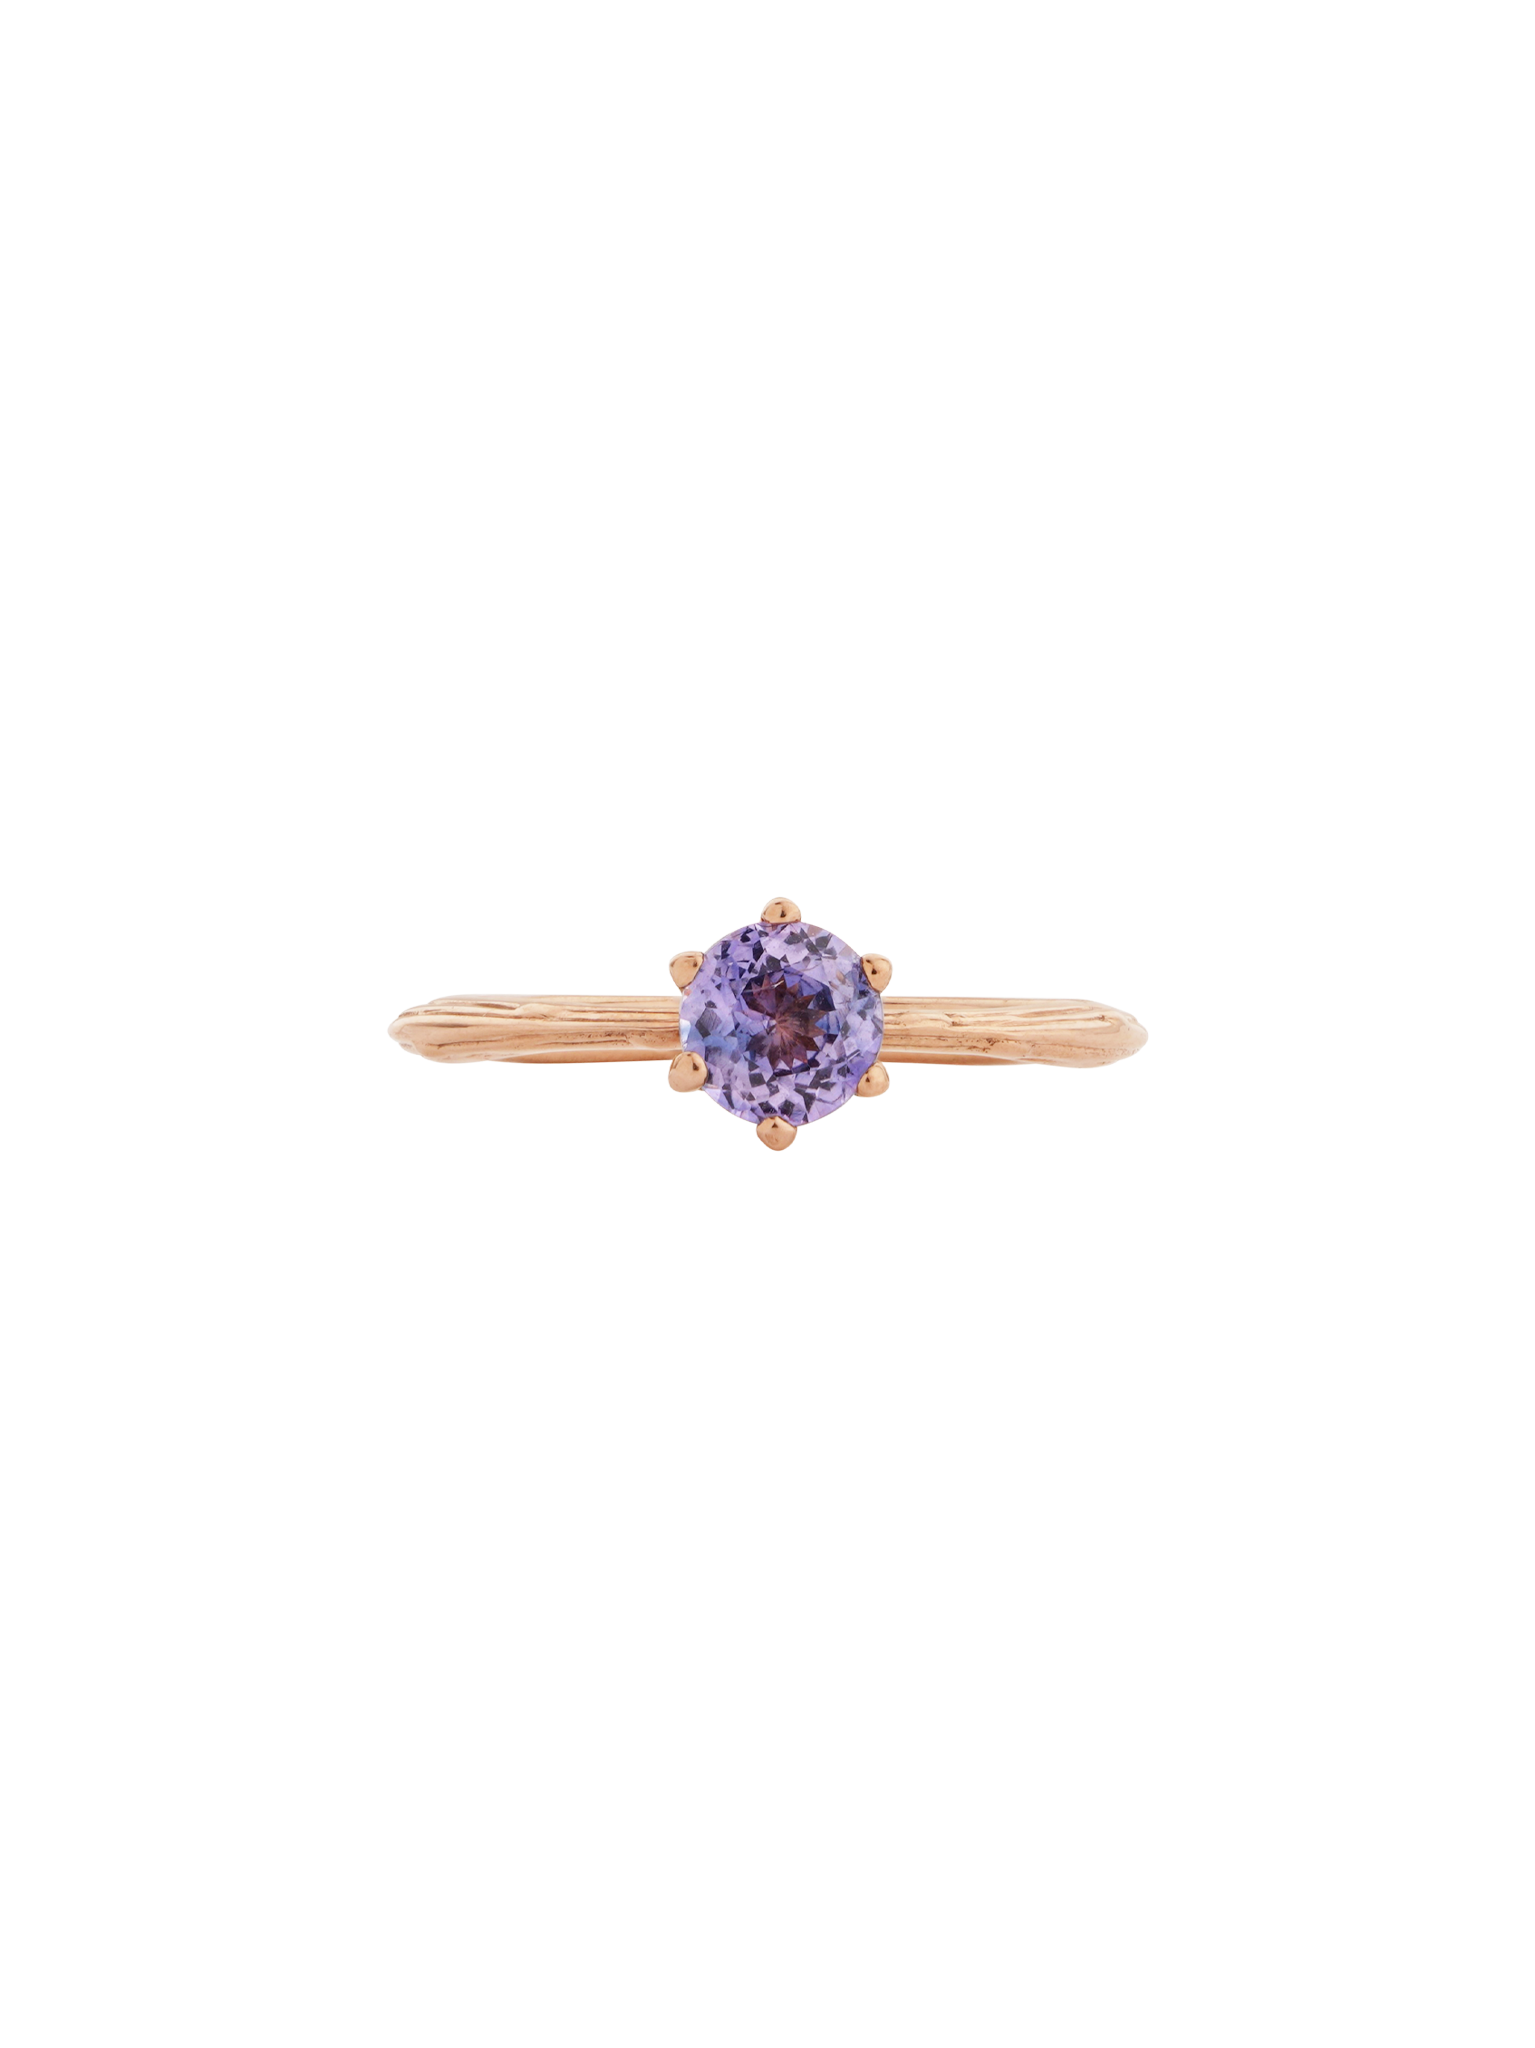 Organic dew drop solitaire in 18ct rose gold